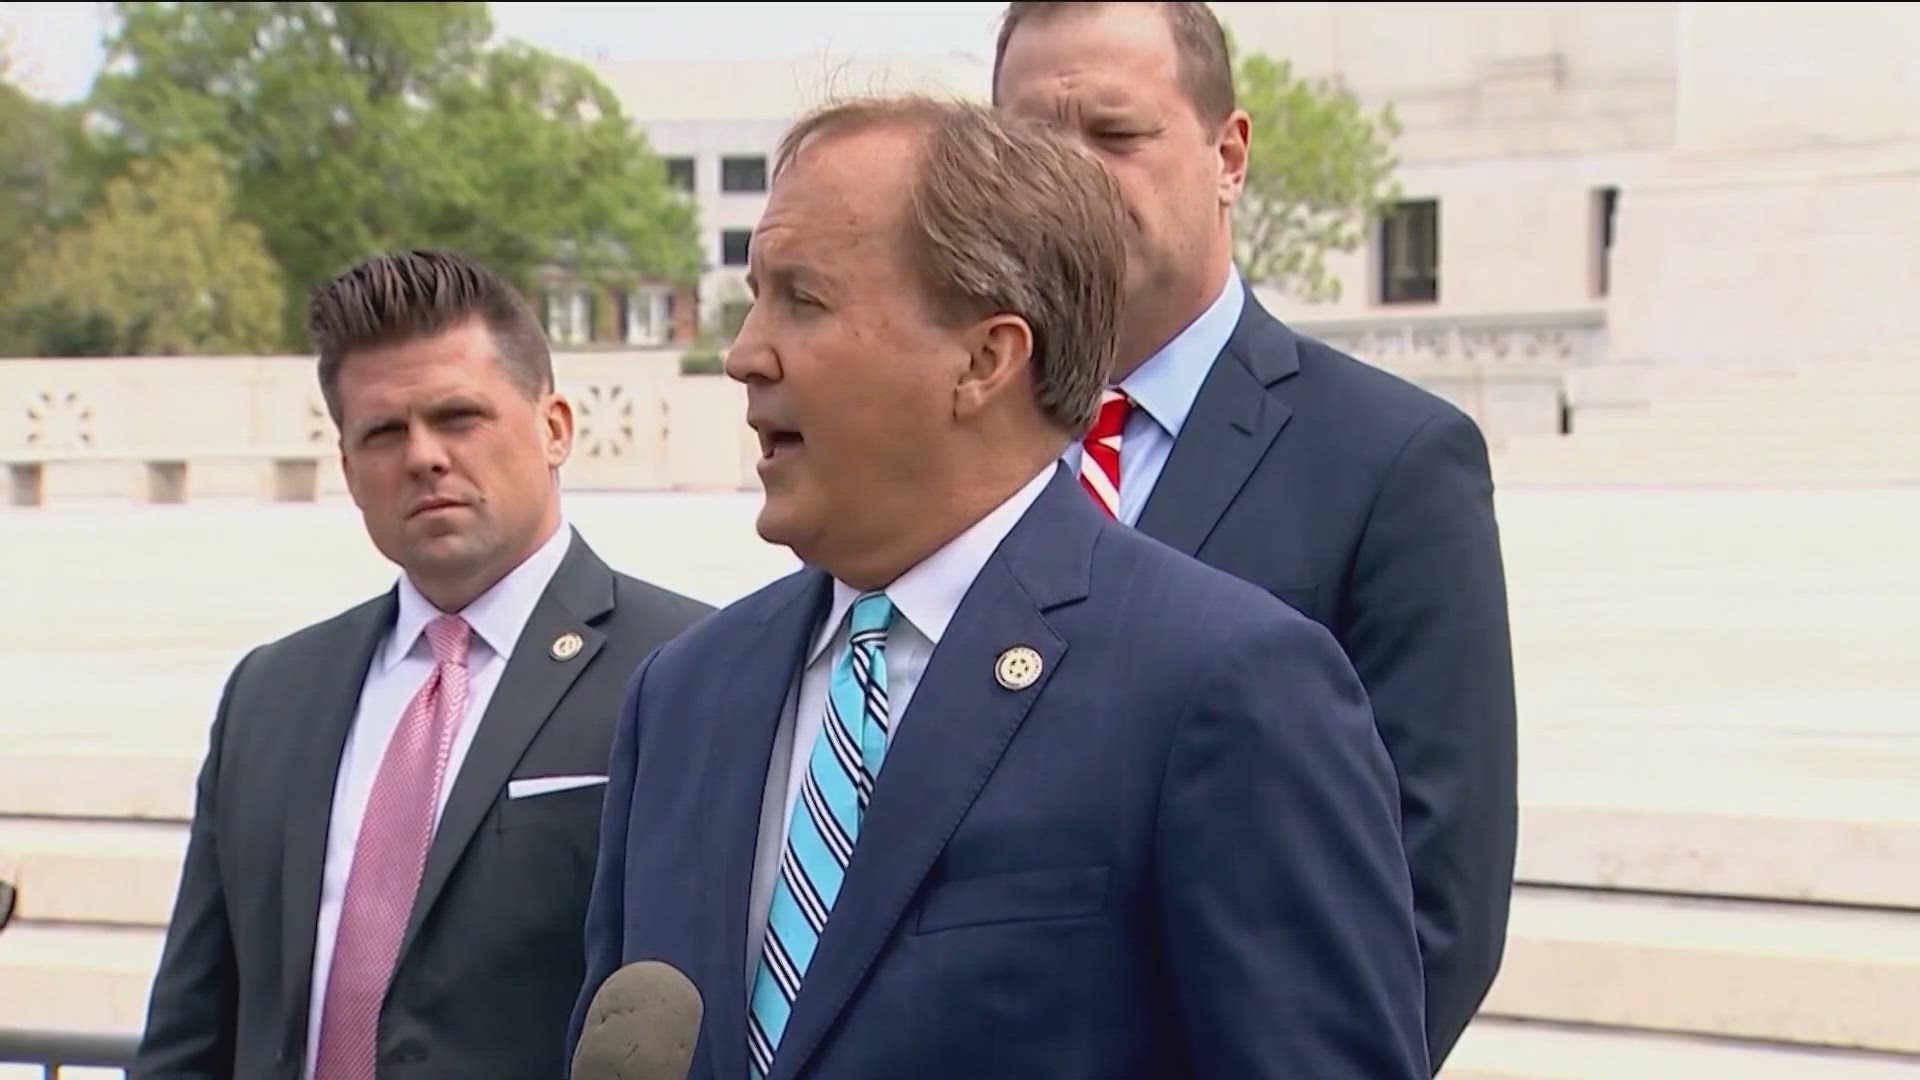 On Saturday, the Texas House voted to impeach Attorney General Ken Paxton. KVUE spoke with a legal expert to find out what's next.